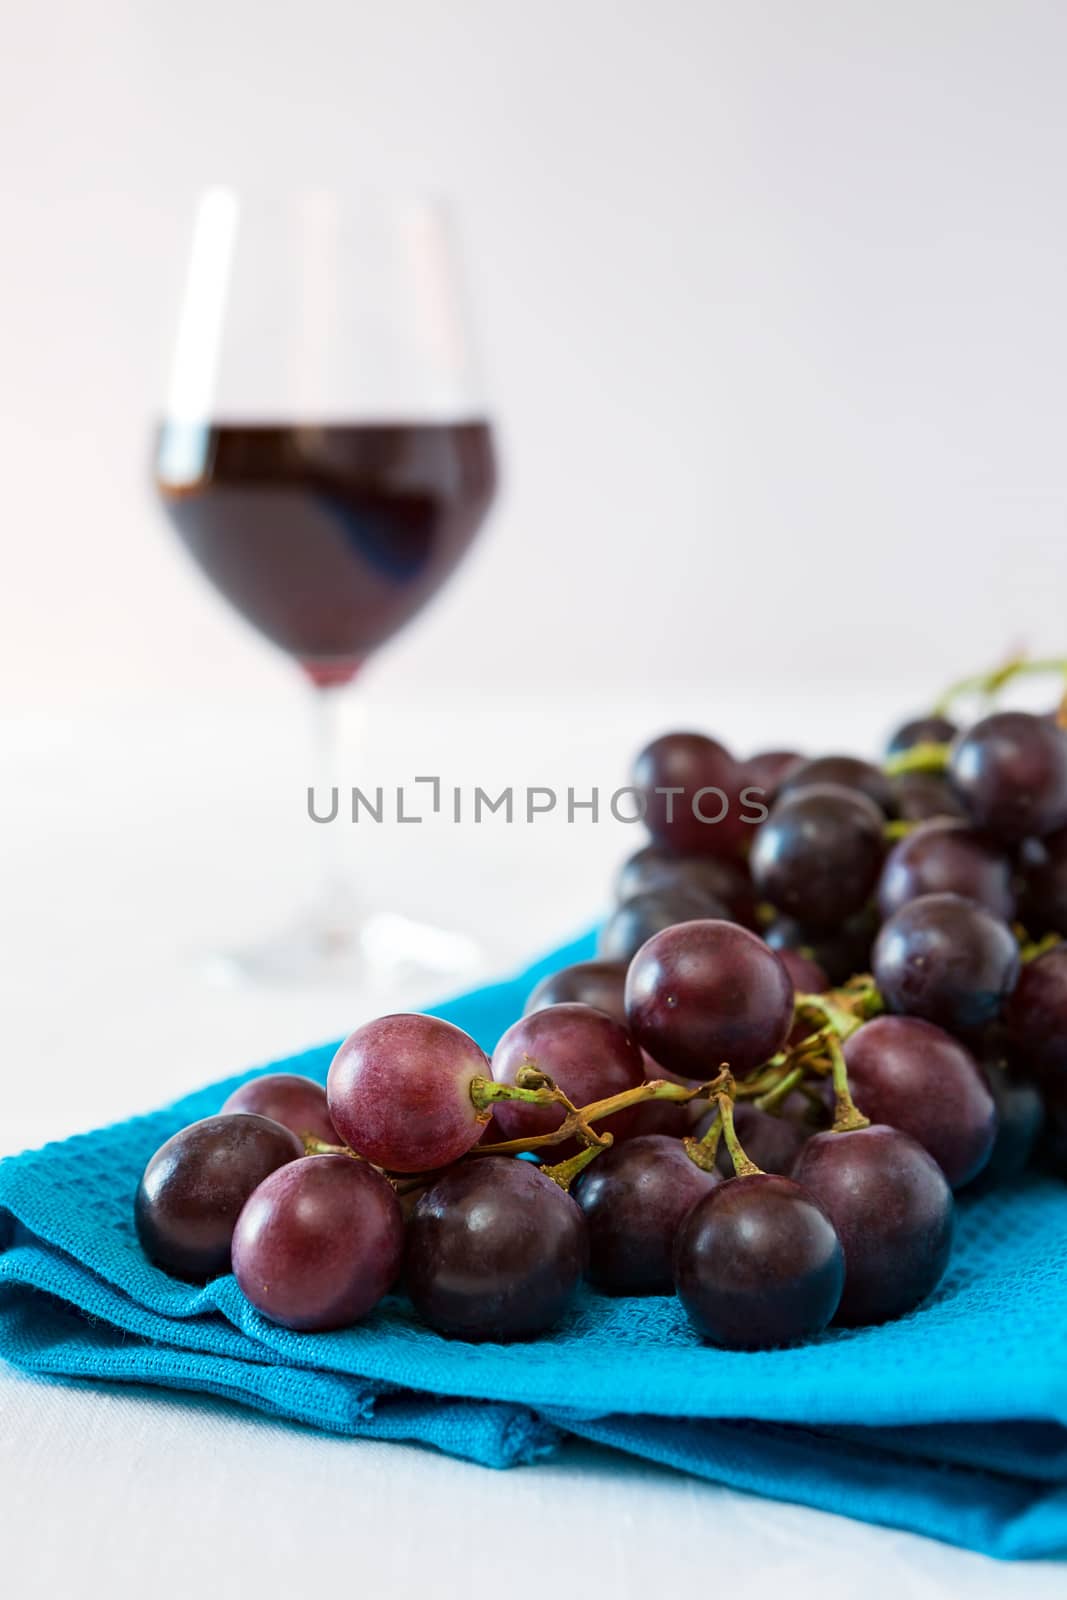 Closeup of a bunch of red grapes and a glass of red wine on background over a blue tablecloth